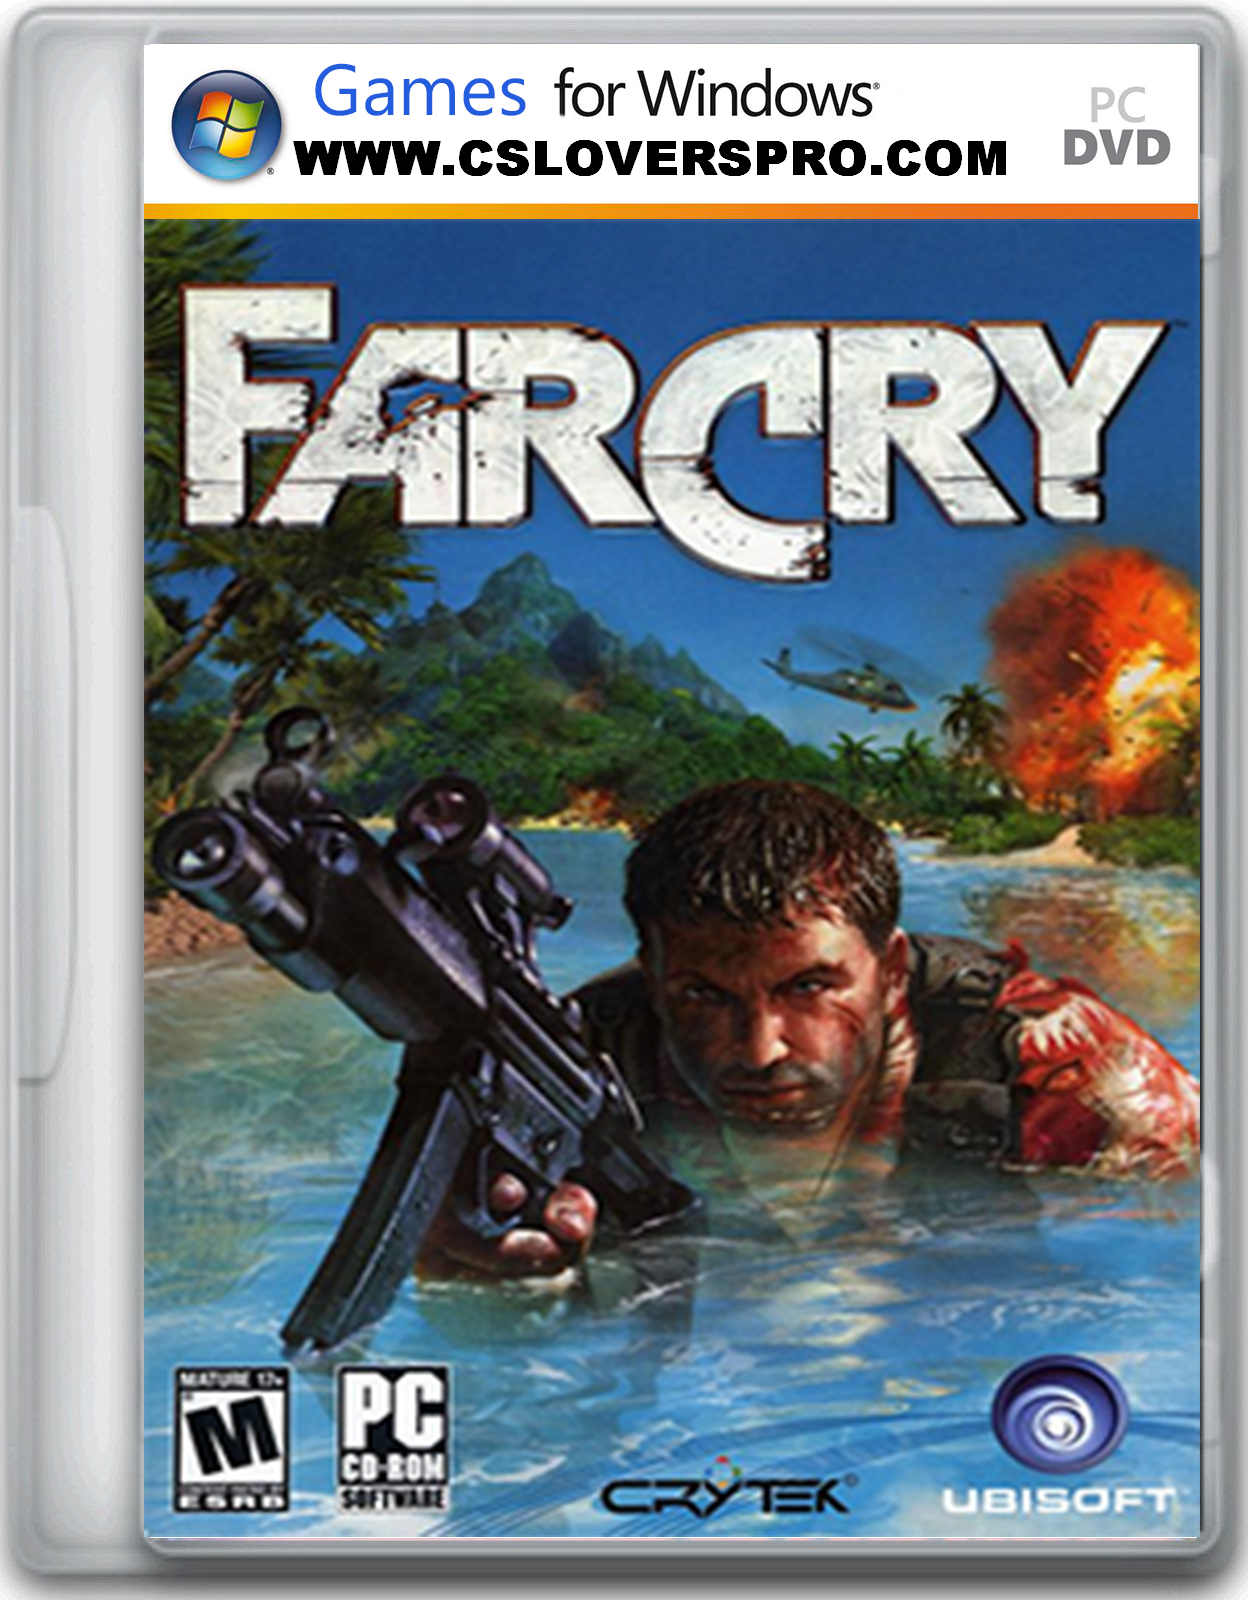 far cry 1 pc download